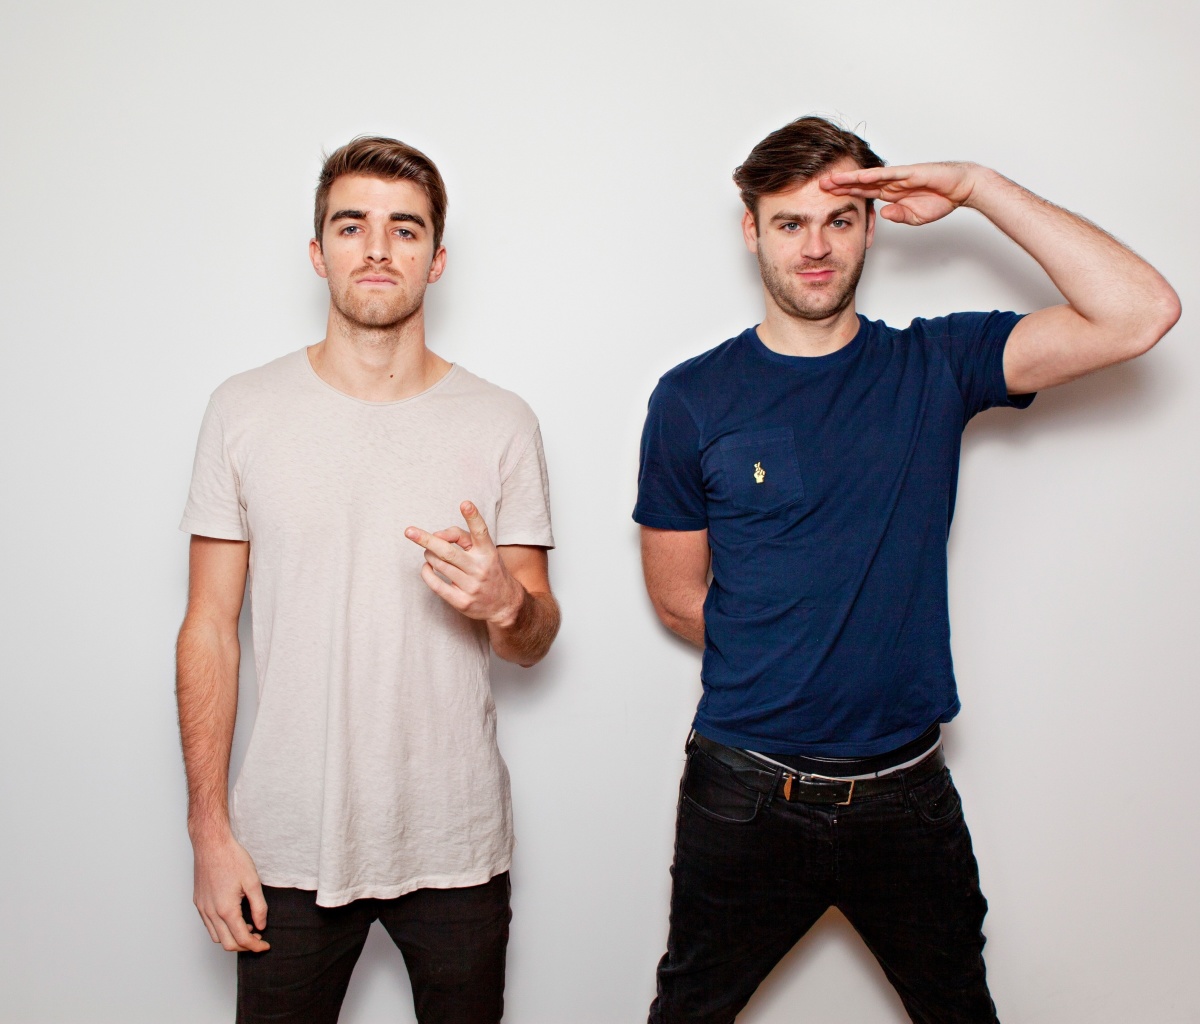 Das The Chainsmokers with Andrew Taggart and Alex Pall Wallpaper 1200x1024